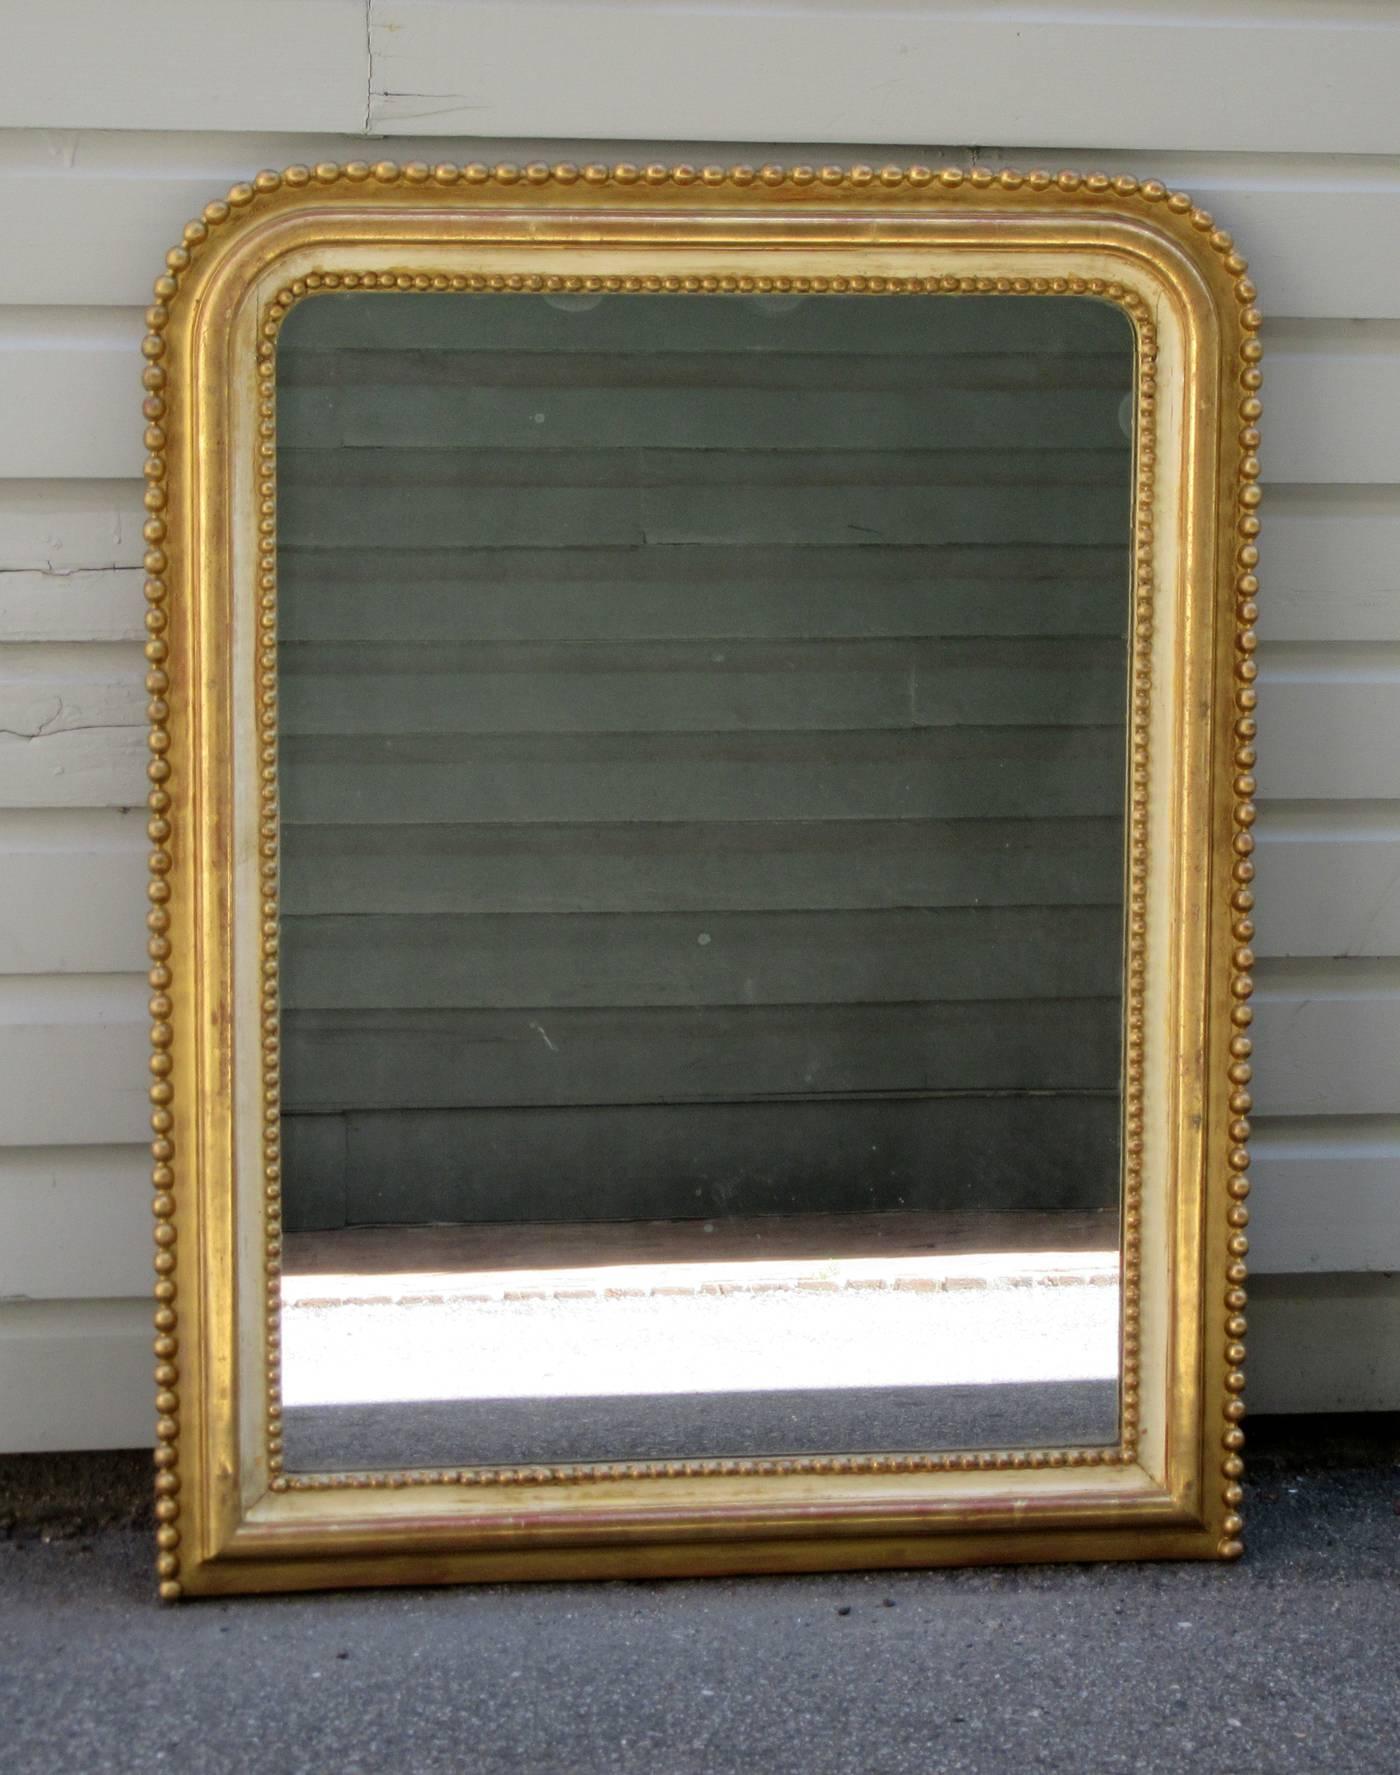 A 19th century French Louis Philippe mirror, circa 1840, with giltwood ball surround and ivory painted channel inset. The mirror plate is original to the mirror.